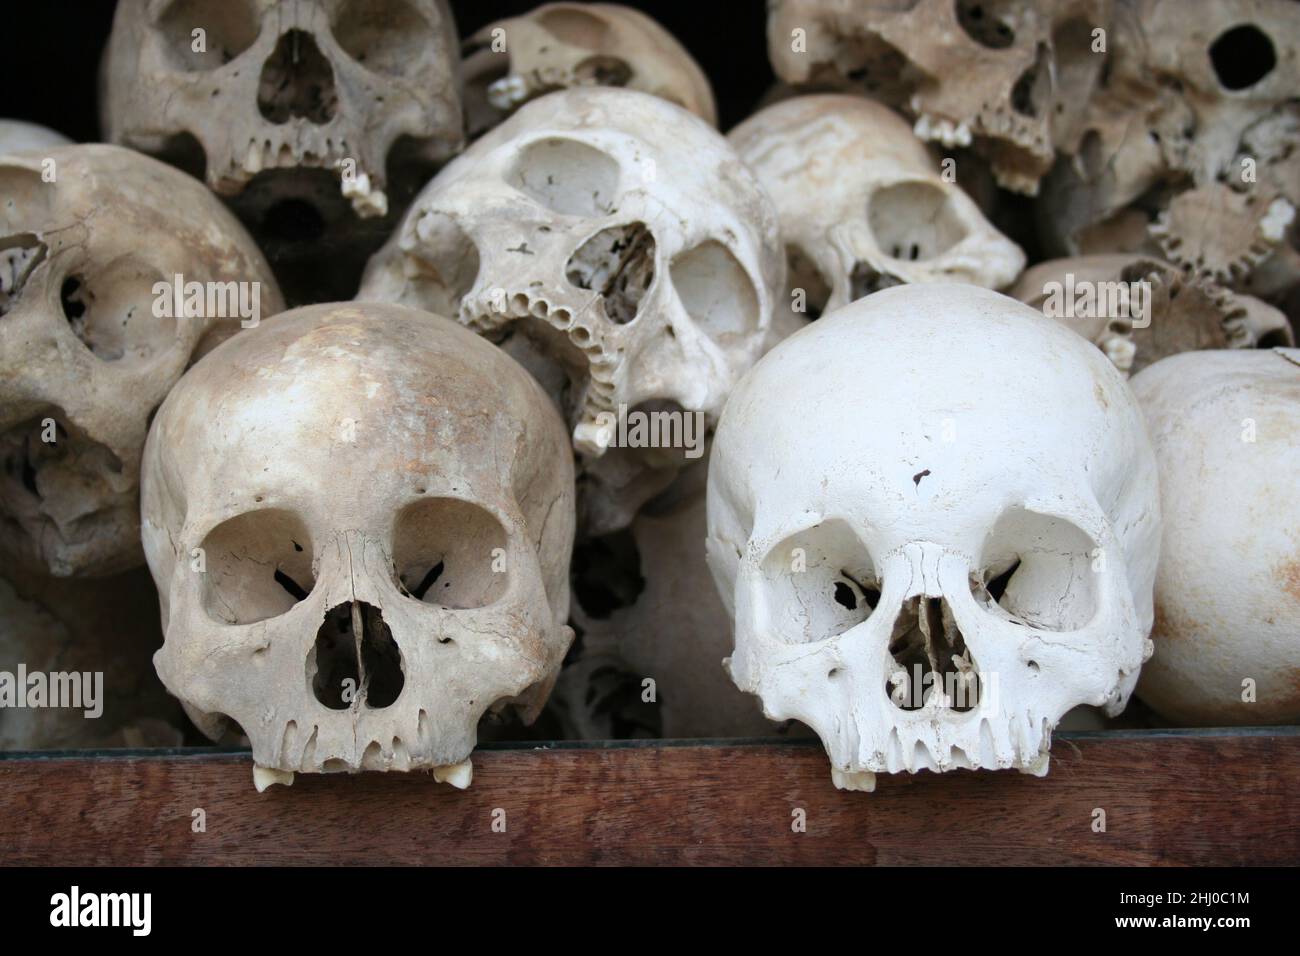 Skulls of the victimes of the Khmer Rouge regime inside a memorial at Choeung Ek, more popularly known as the Killing Fields, located south of Phnom P Stock Photo